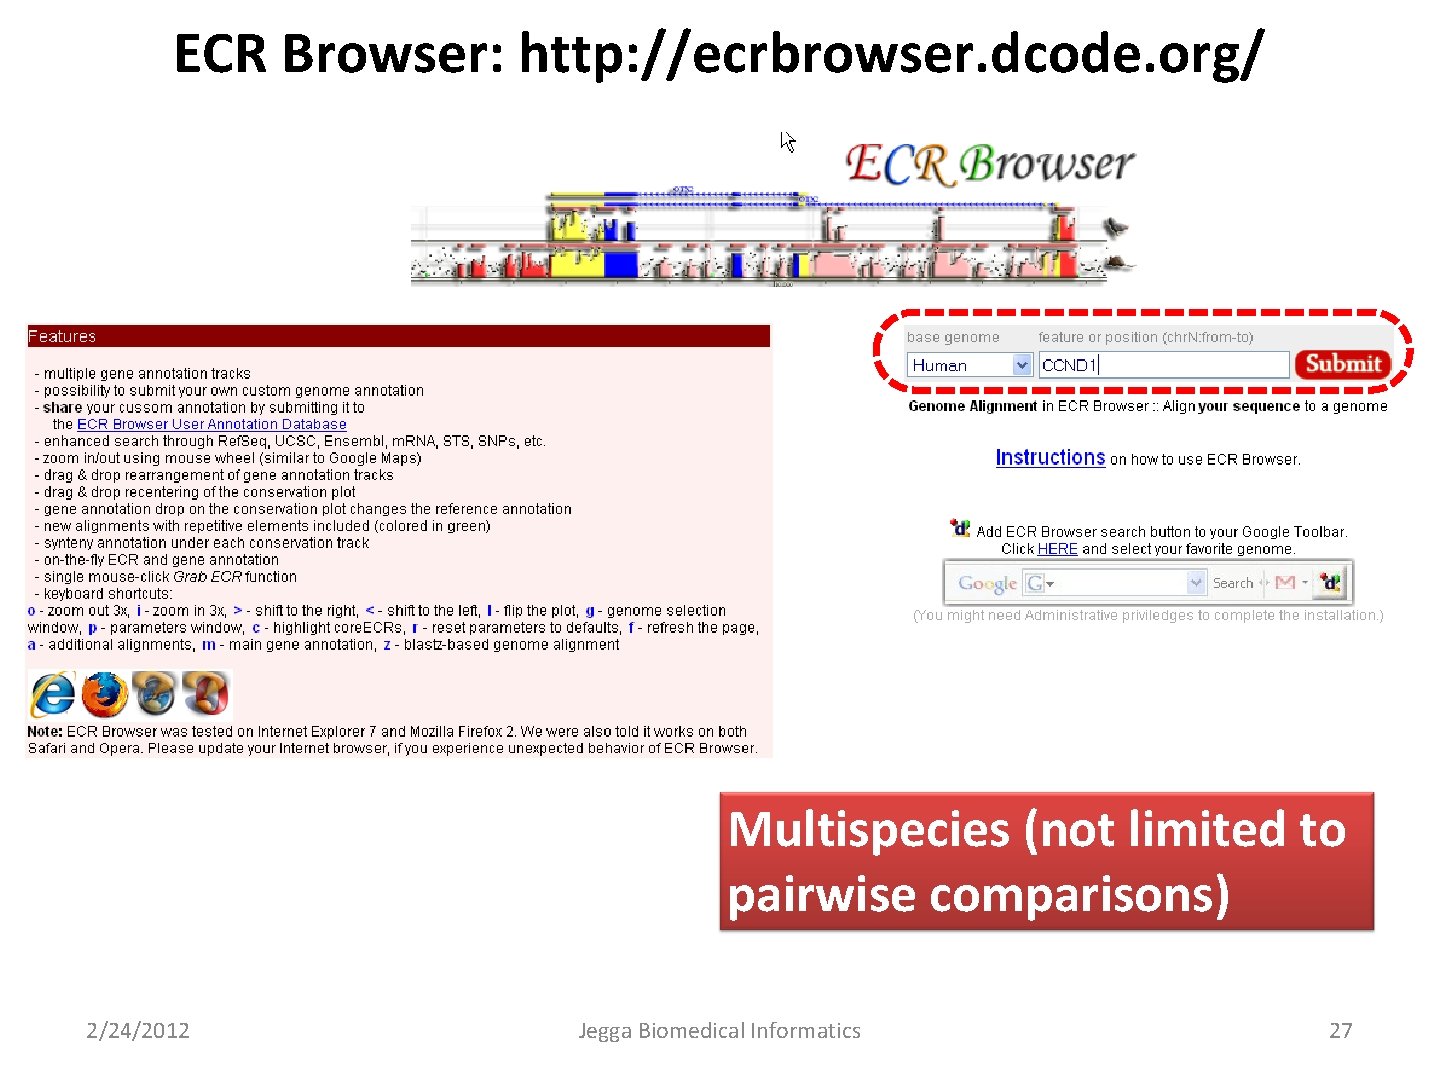 ECR Browser: http: //ecrbrowser. dcode. org/ Multispecies (not limited to pairwise comparisons) 2/24/2012 Jegga